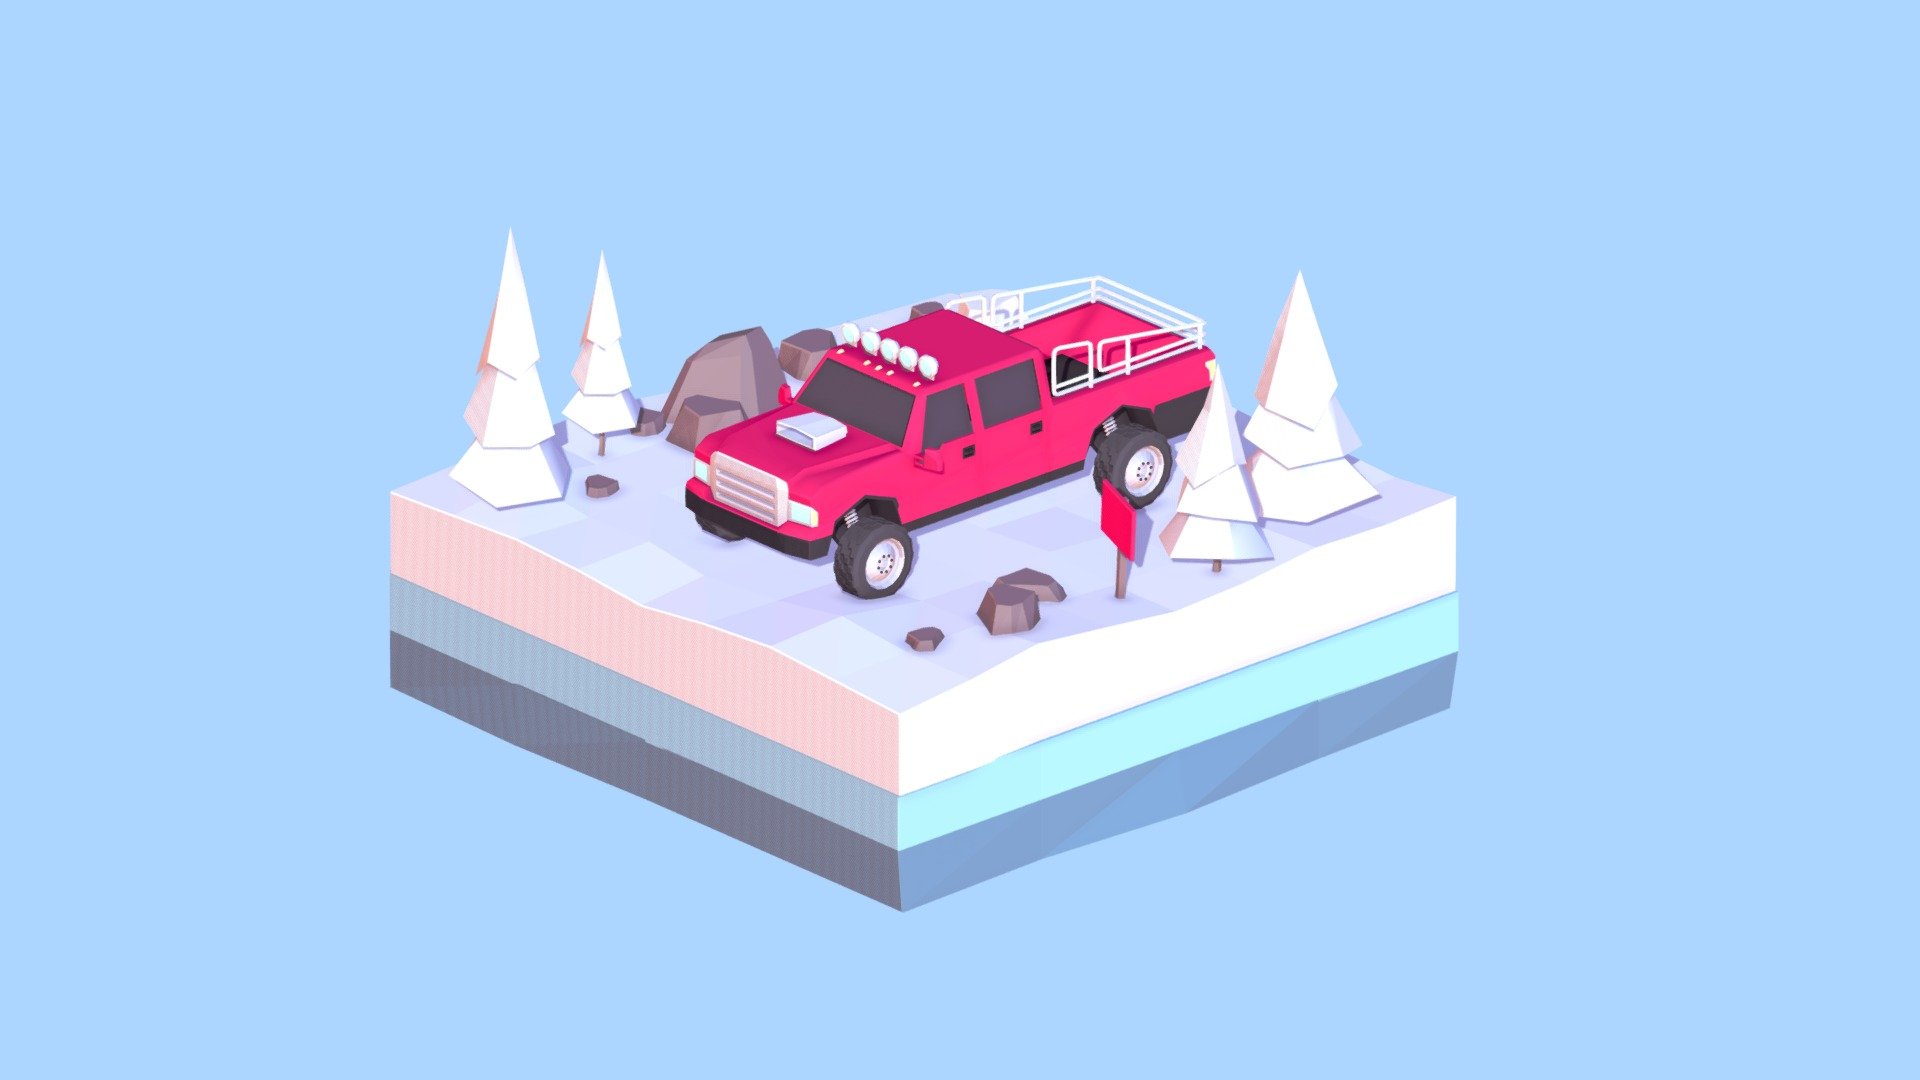 Hign Quality 3d Scene for Motion Design, Game Development, Digital  Illustration .Works on Browser, Realtime Render Engines.

Cartoon Low Poly Snow Jeep Tracks Vehicle Island Scene

Created on Cinema 4d R17 

10 013 Polygons

Procedural Textured 

Game Ready, AR/ VR Ready
 - Cartoon Low Poly Snow Jeep Wheel Vehicle - Buy Royalty Free 3D model by antonmoek 3d model